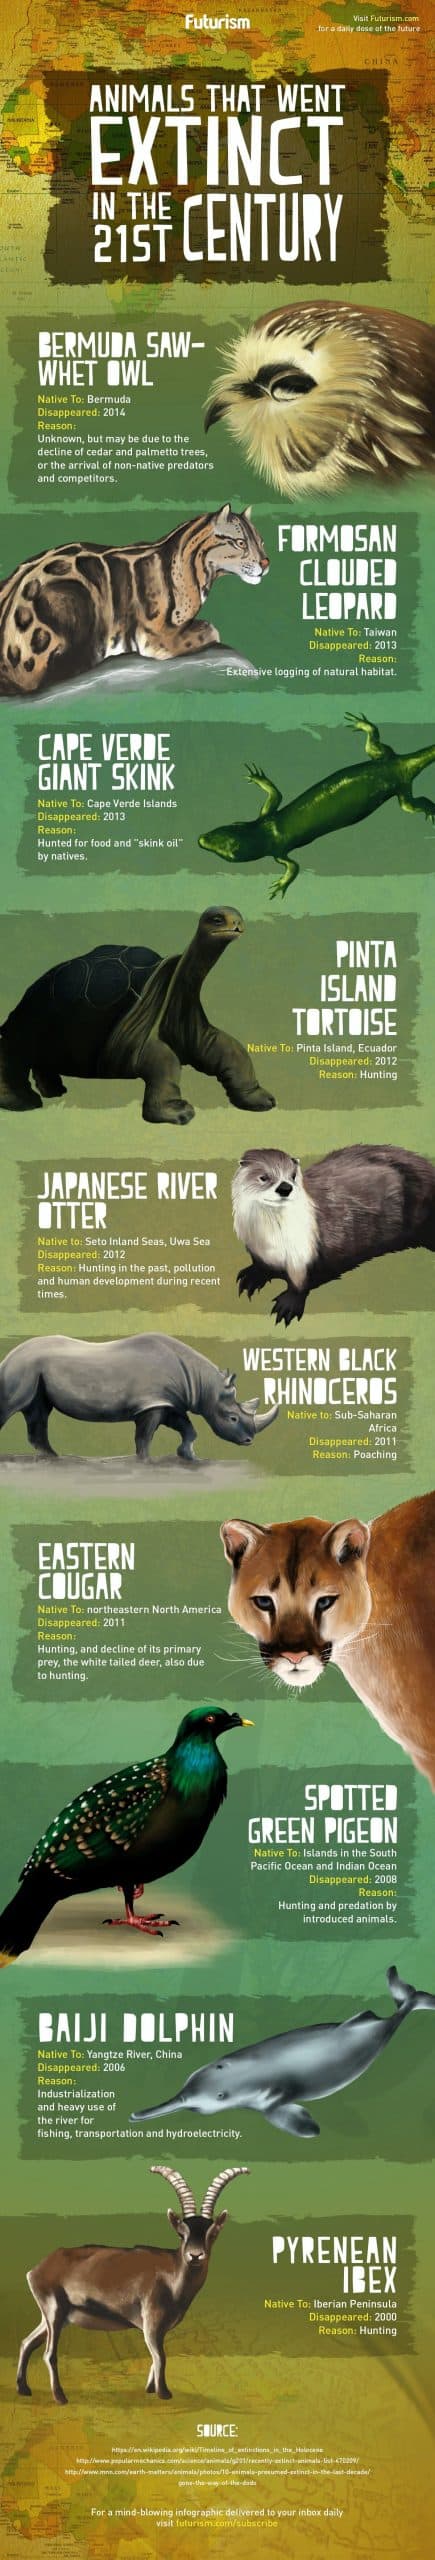 10 Animals That Disappeared In The Last 20 Years | Daily Infographic